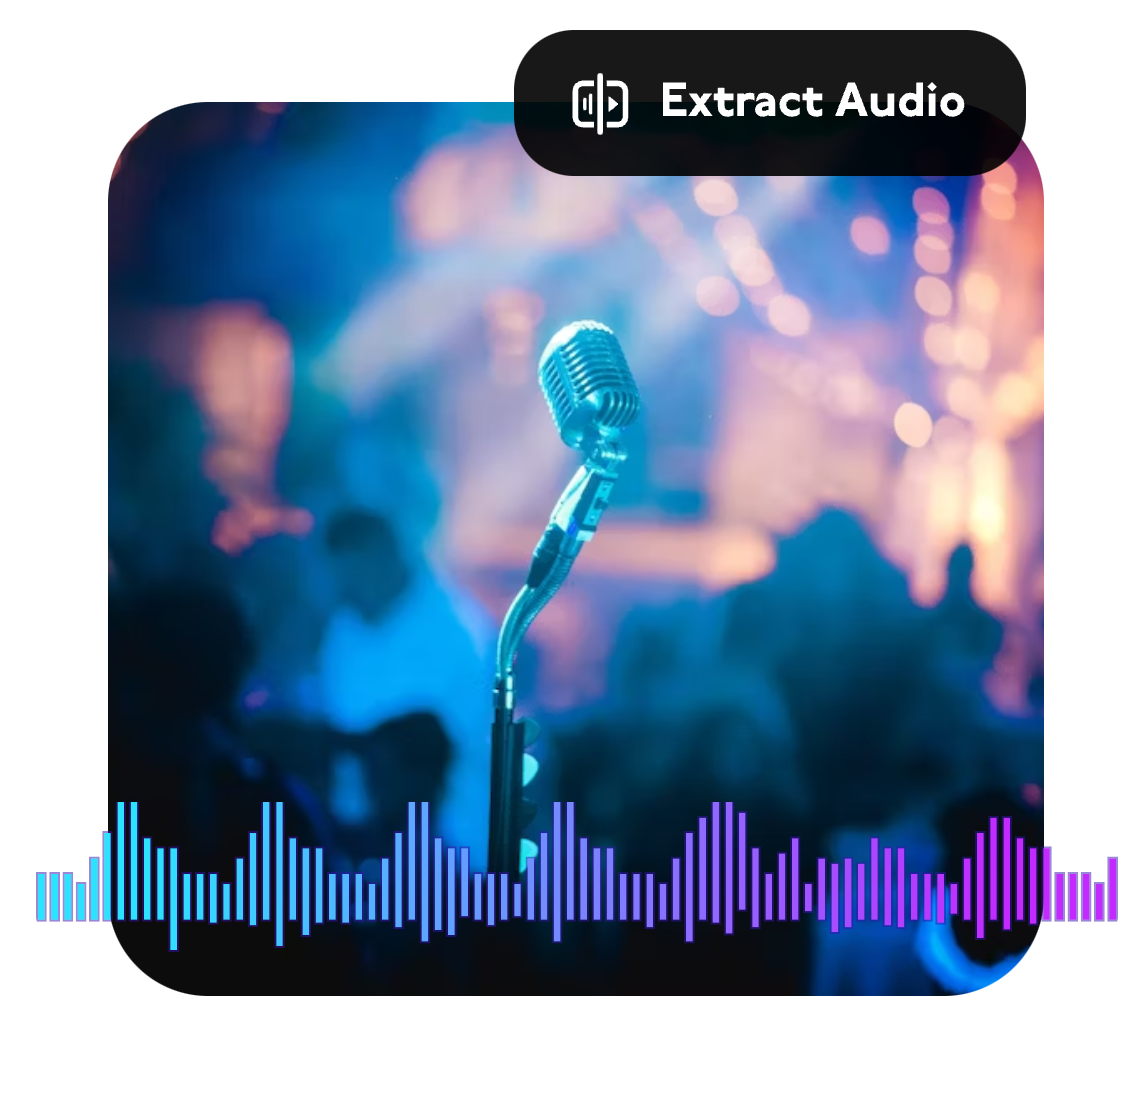 extract audio from video in one click with Clipfly audio extractor